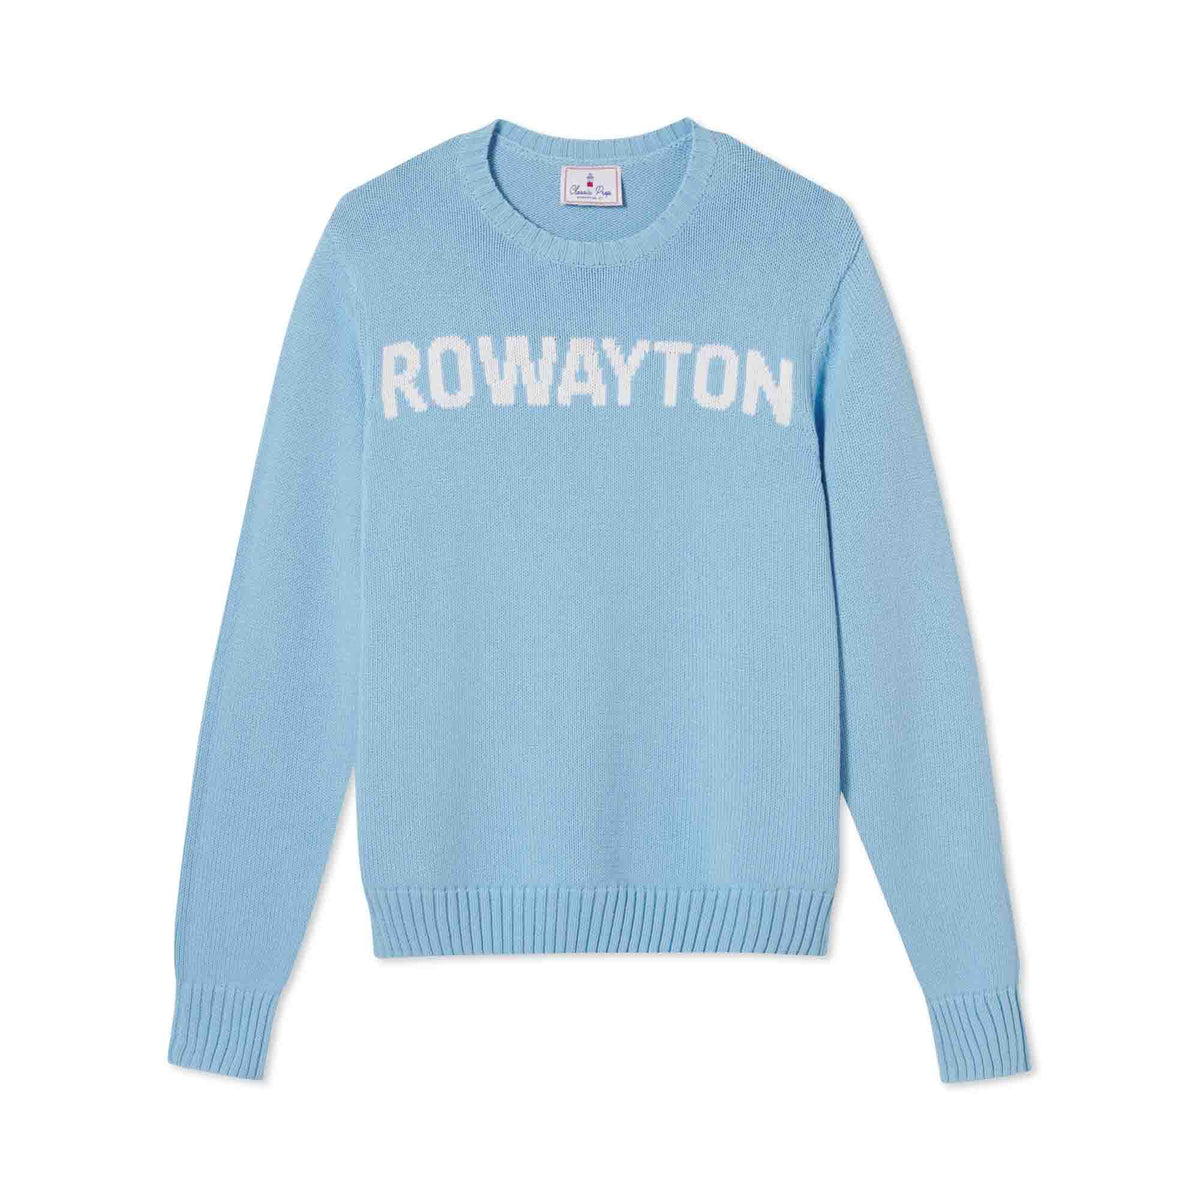 Classic and Preppy Adult Rowayton Sweater, Open Air-Sweaters-Open Air-Adult L-CPC - Classic Prep Childrenswear